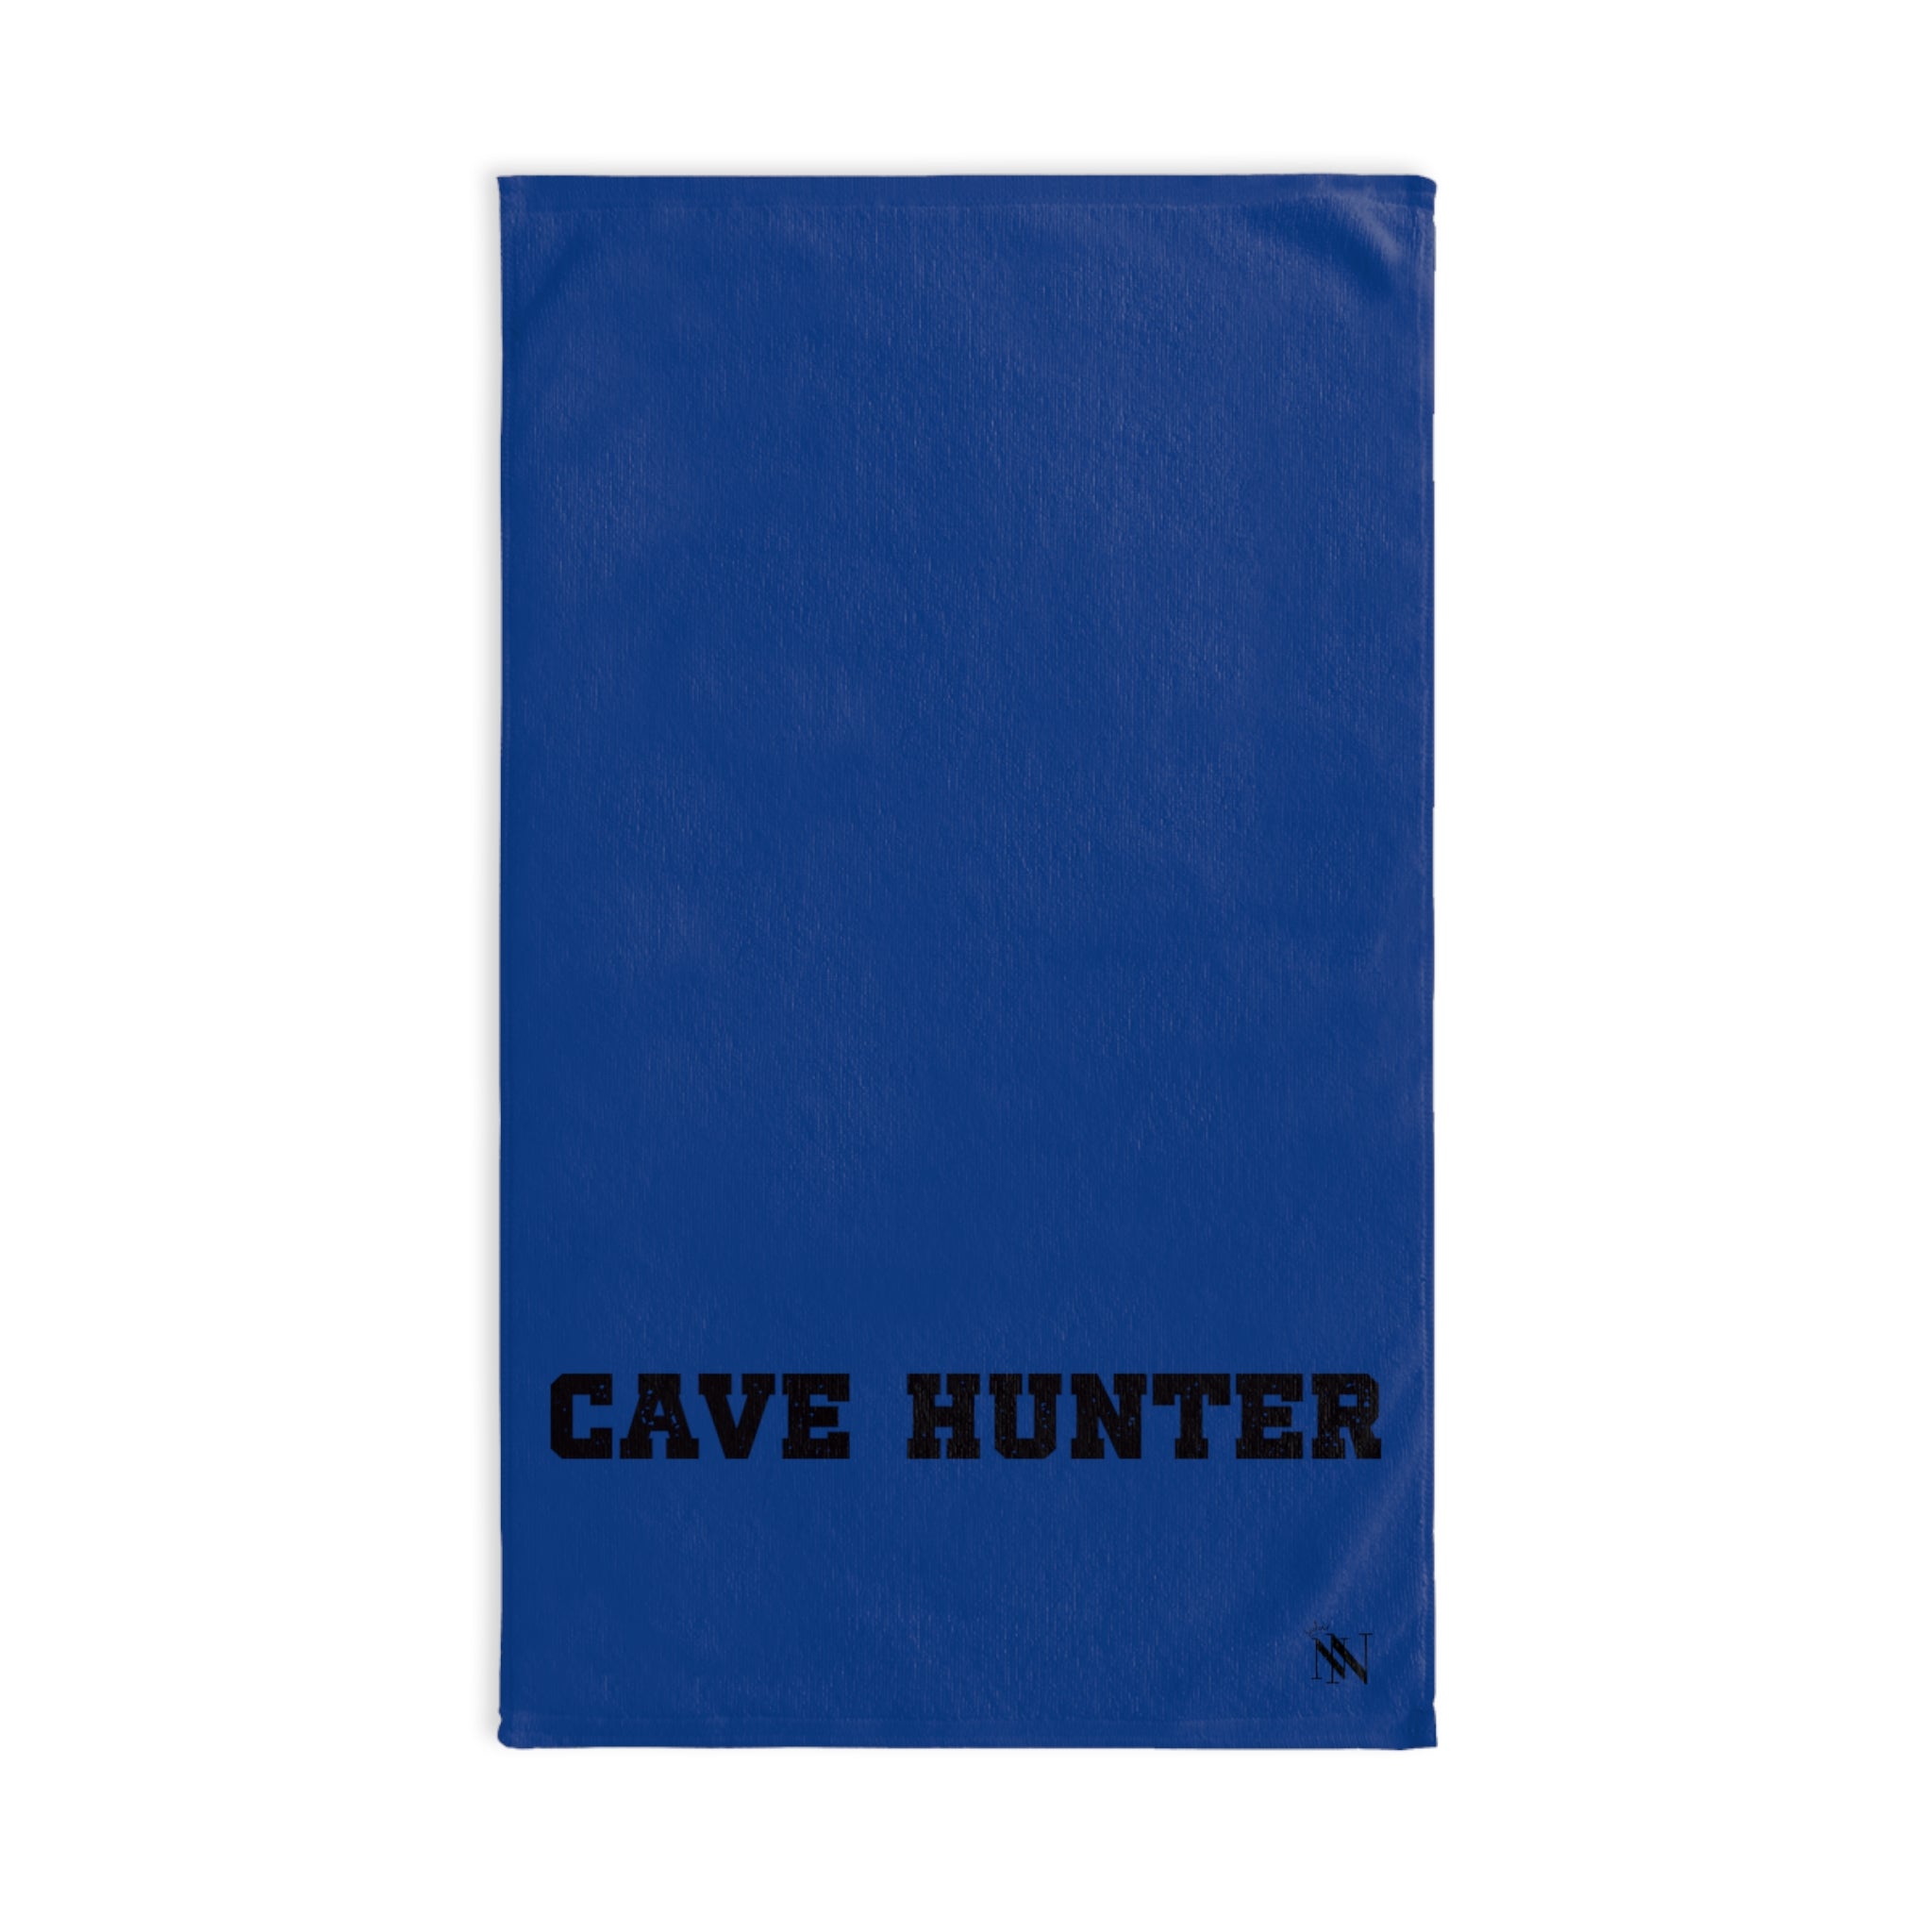 Cave Hunter Blue | Gifts for Boyfriend, Funny Towel Romantic Gift for Wedding Couple Fiance First Year Anniversary Valentines, Party Gag Gifts, Joke Humor Cloth for Husband Men BF NECTAR NAPKINS